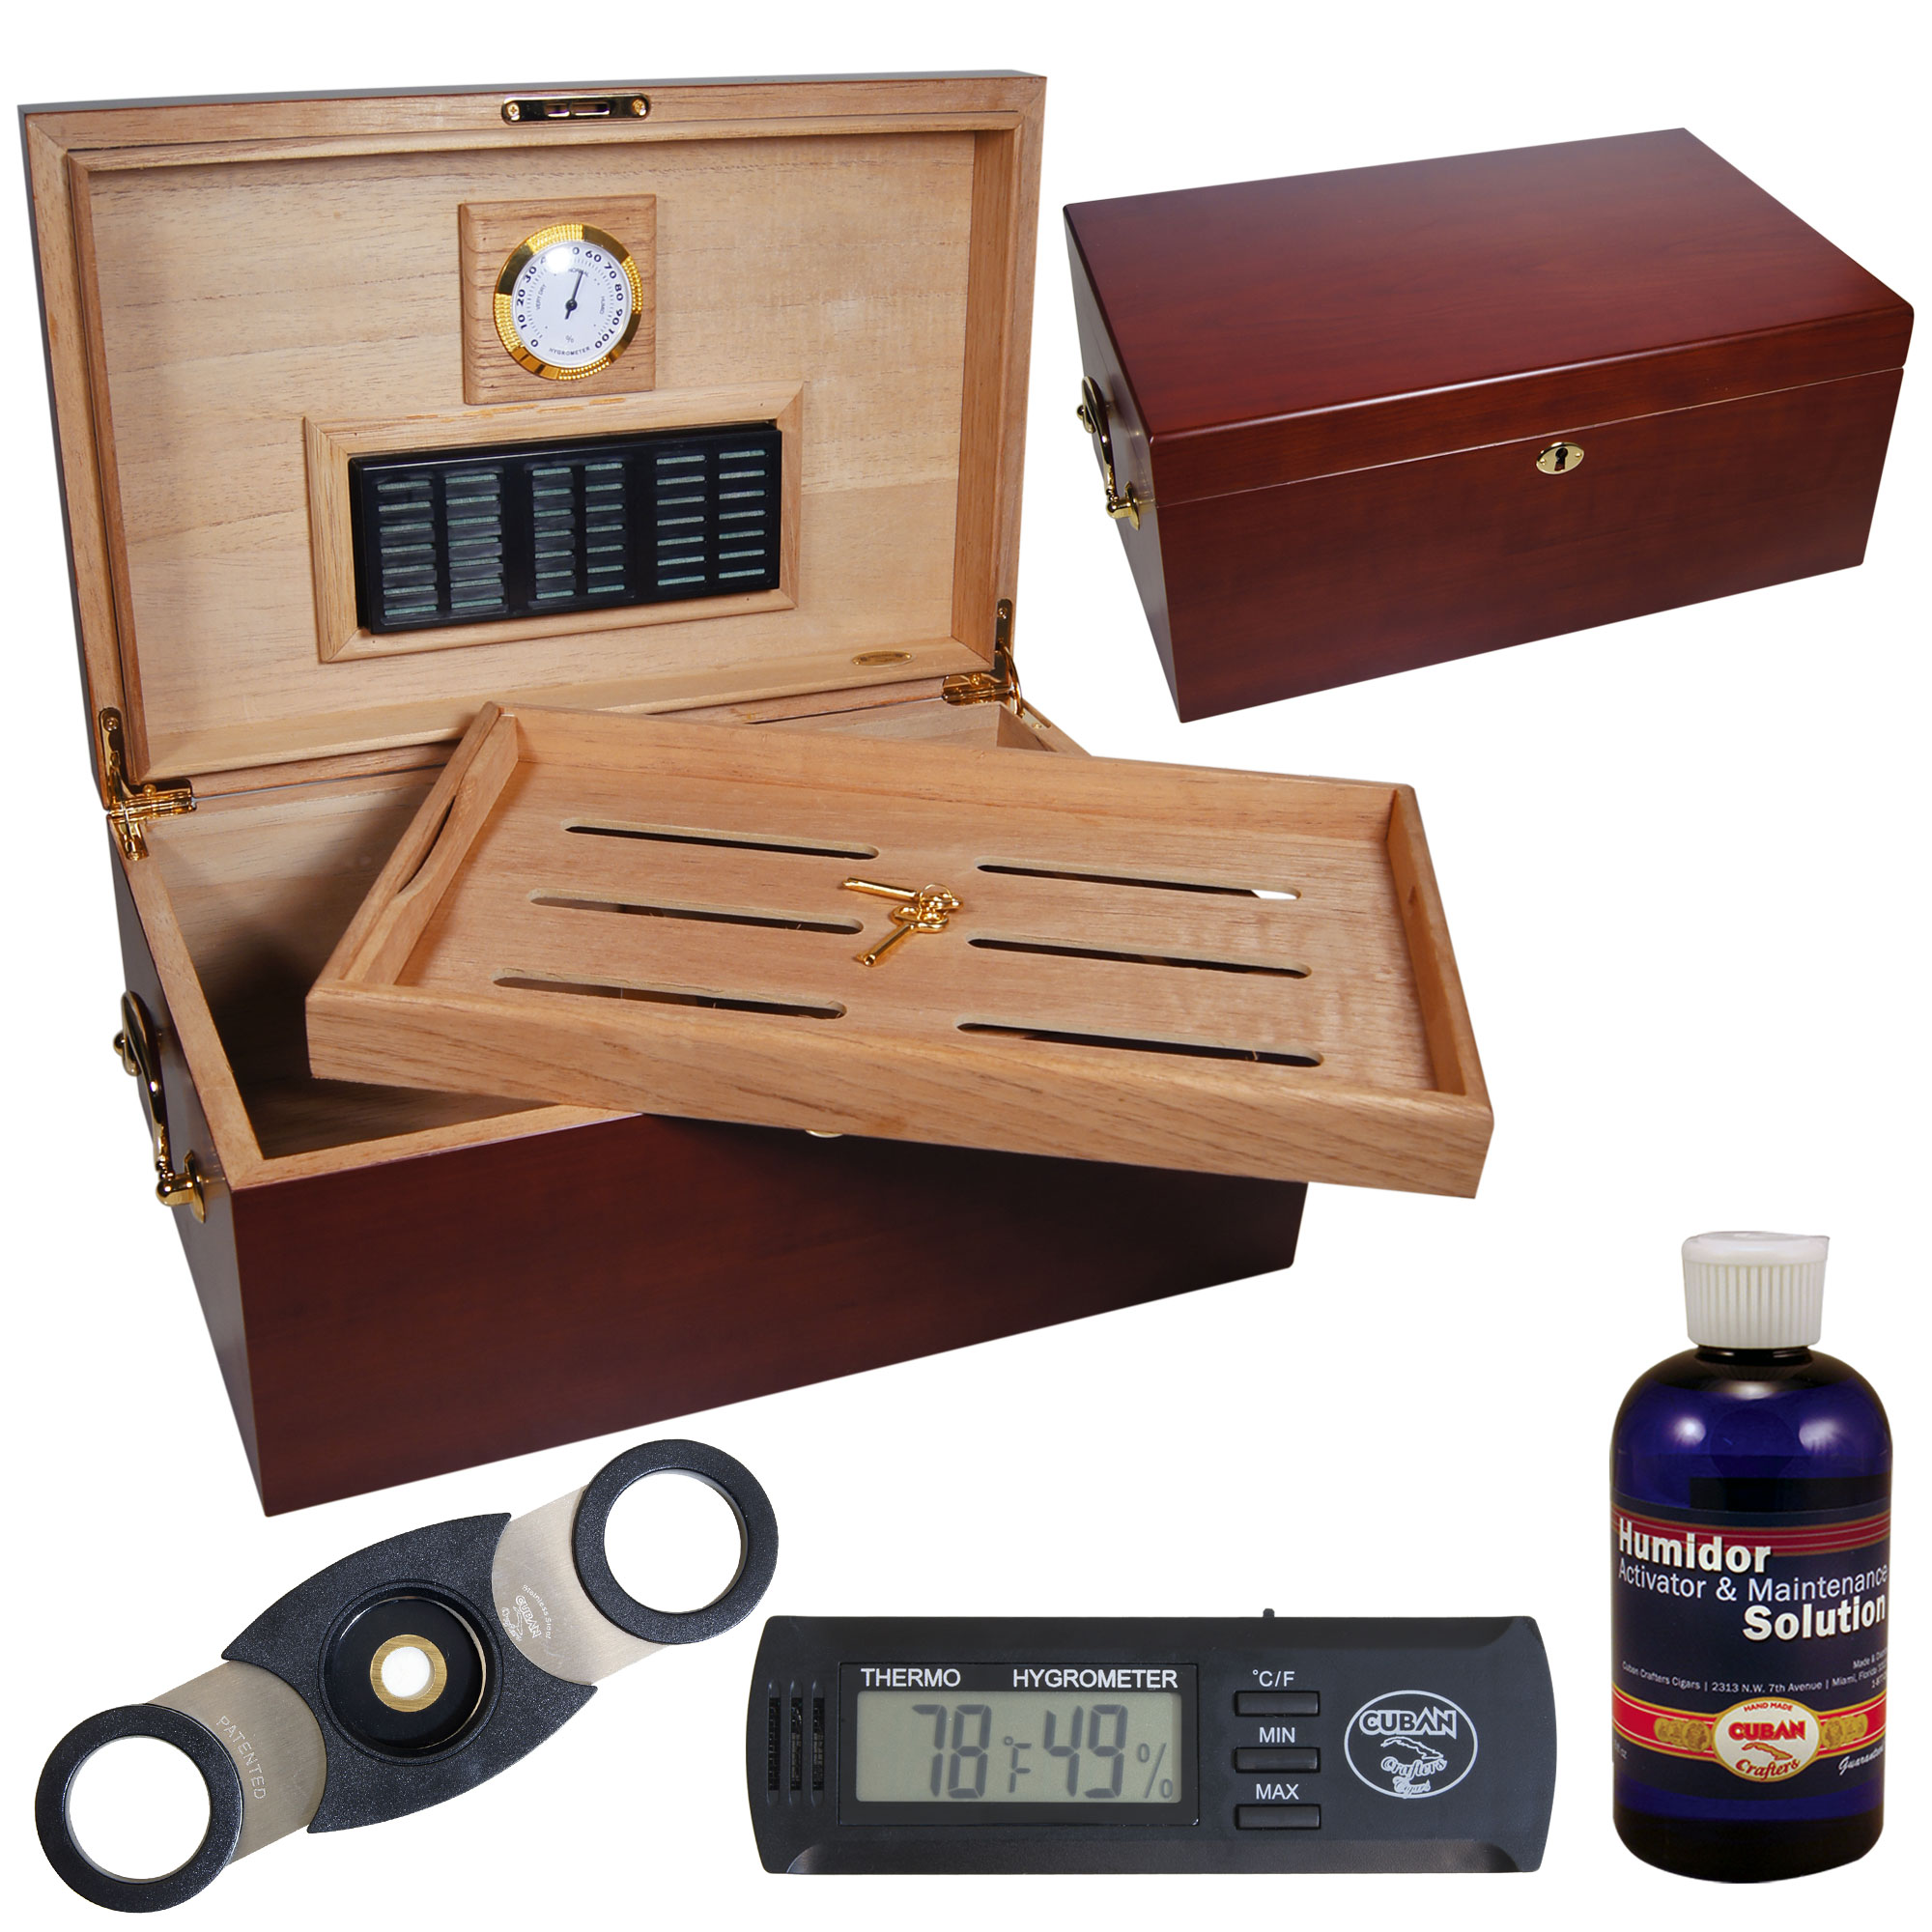   Crafters Perfect Humidor with Digital Hygrometer Set  